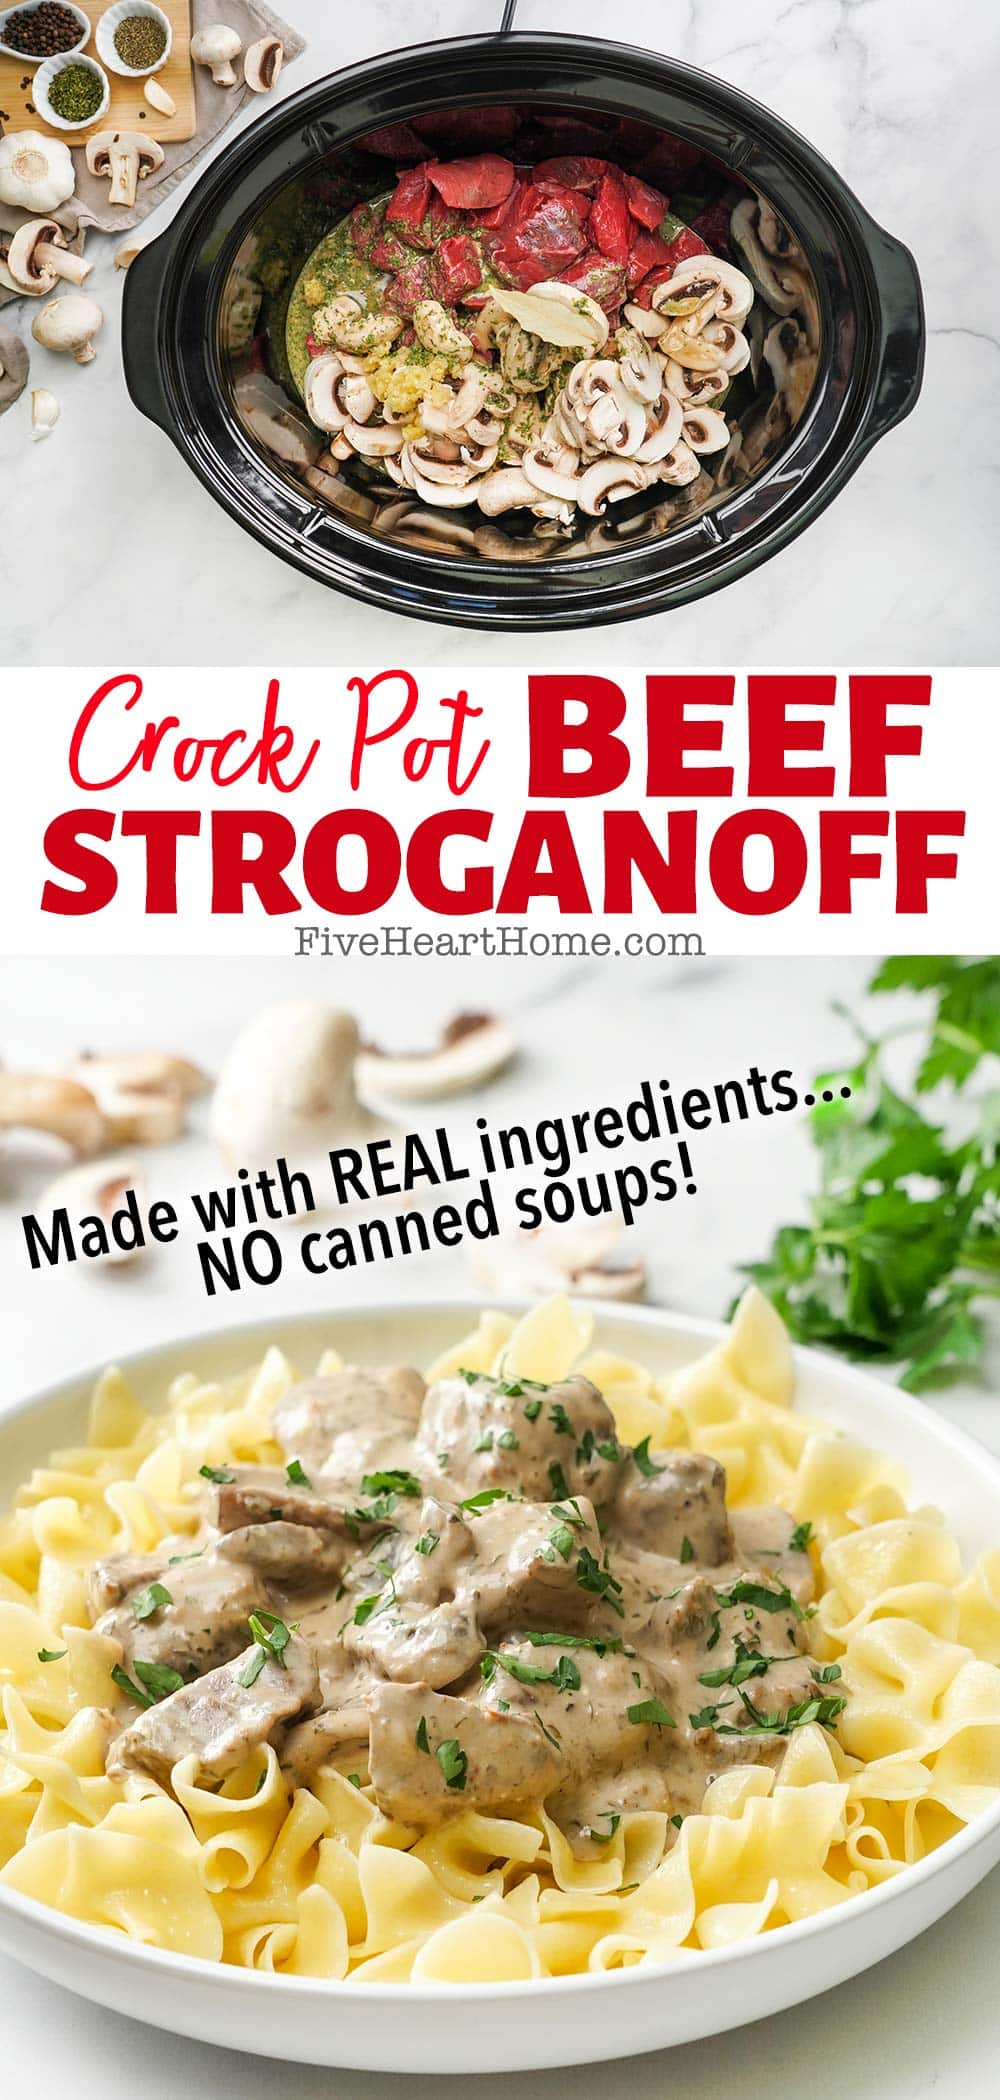 Crock Pot Beef Stroganoff ~ features tender chunks of beef and hearty mushrooms in an all-natural sour cream sauce for an easy, comforting slow cooker dinner made with real ingredients! | FiveHeartHome.com via @fivehearthome